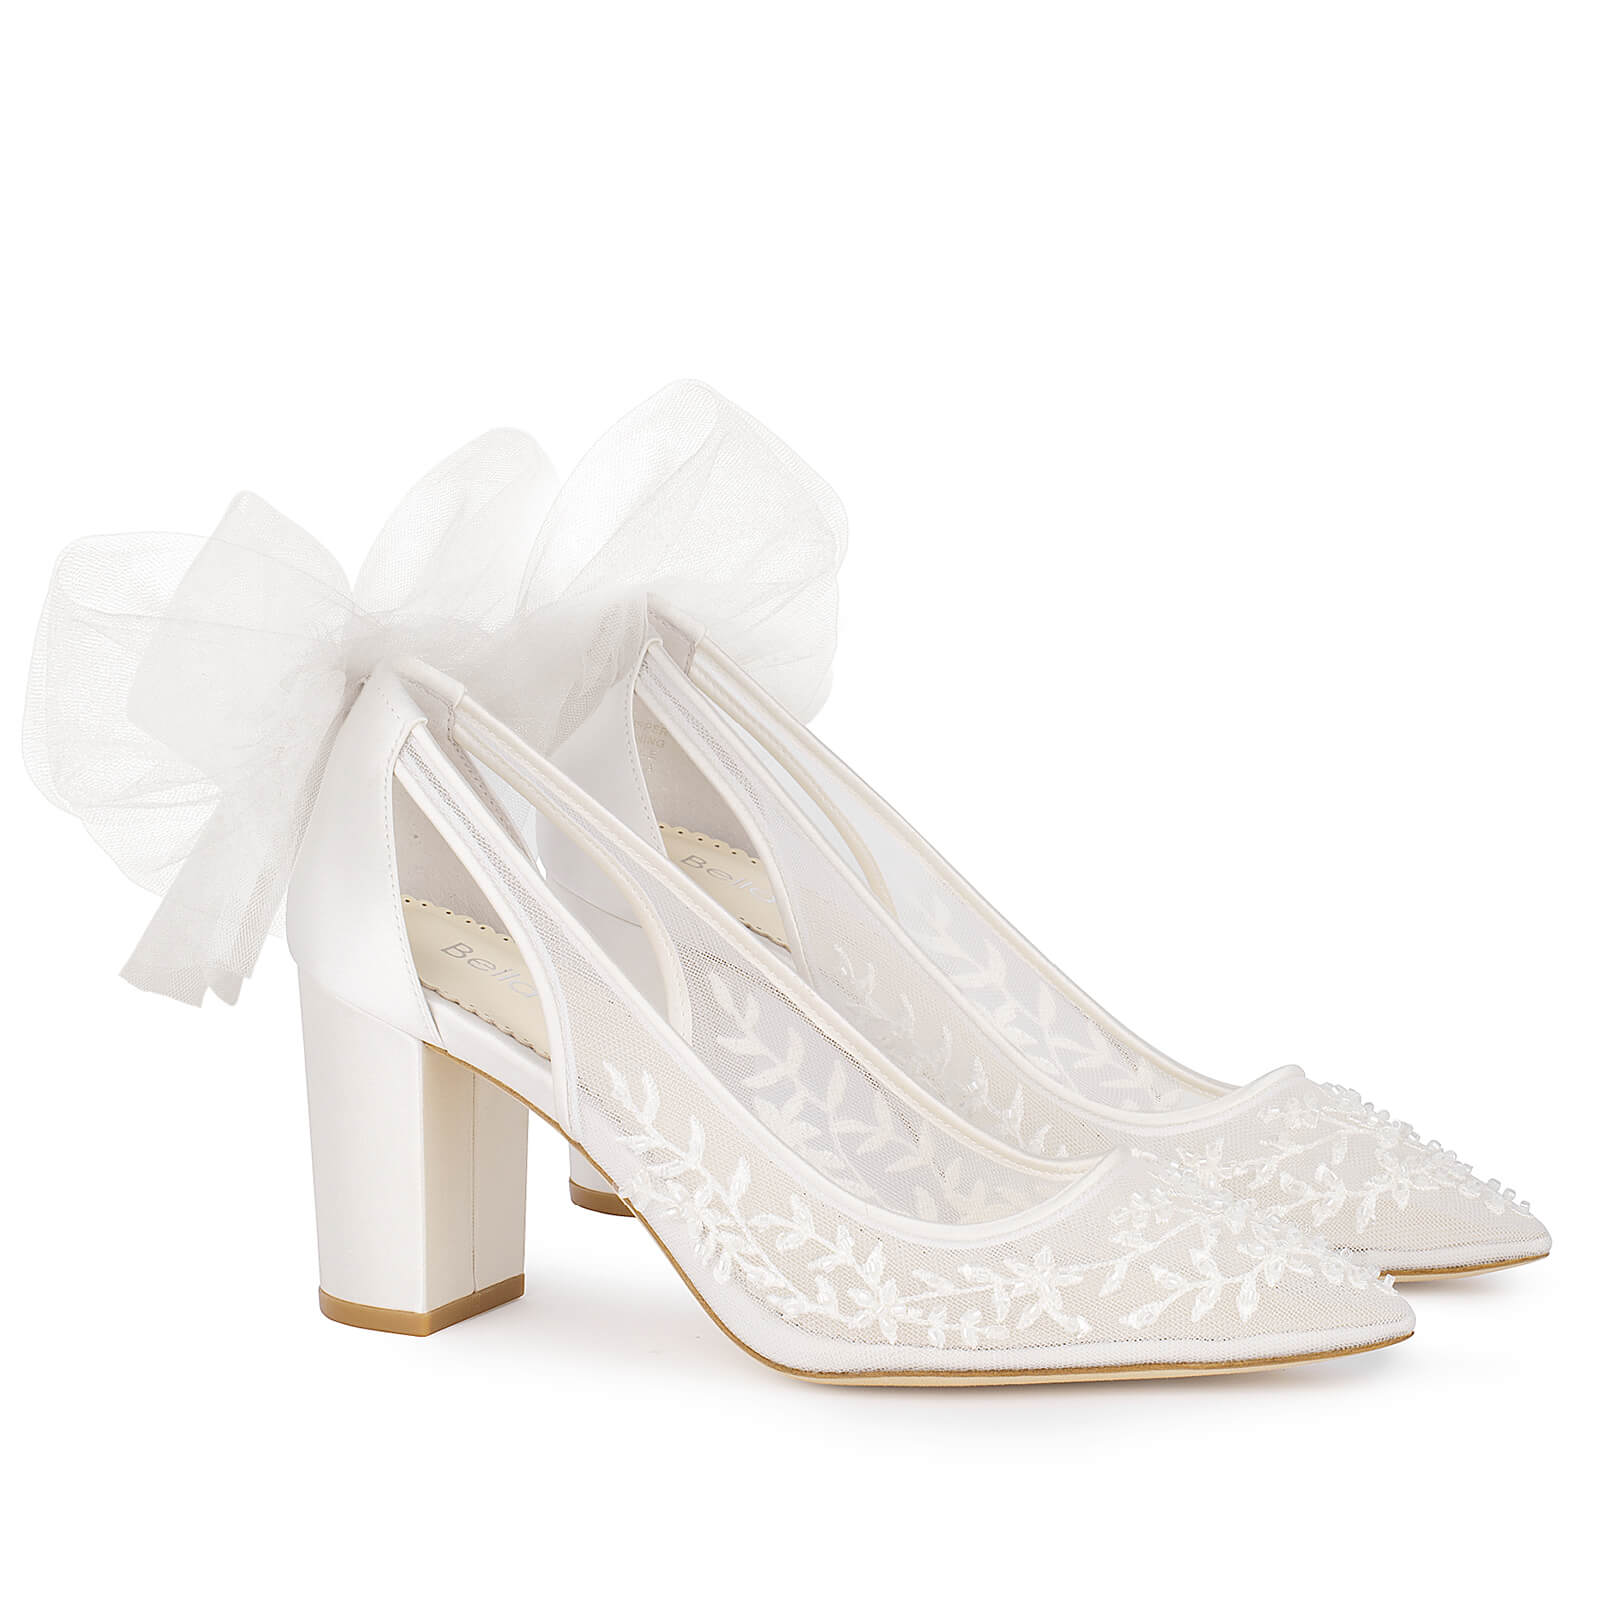 Custom Ivory Bridal Flats With Lace, Pearls & Butterfly Beads 4.5cm Or 8cm  Heel, Handmade Bridesmaid Wedding Shoes From Graceful_ladies, $57.52 |  DHgate.Com